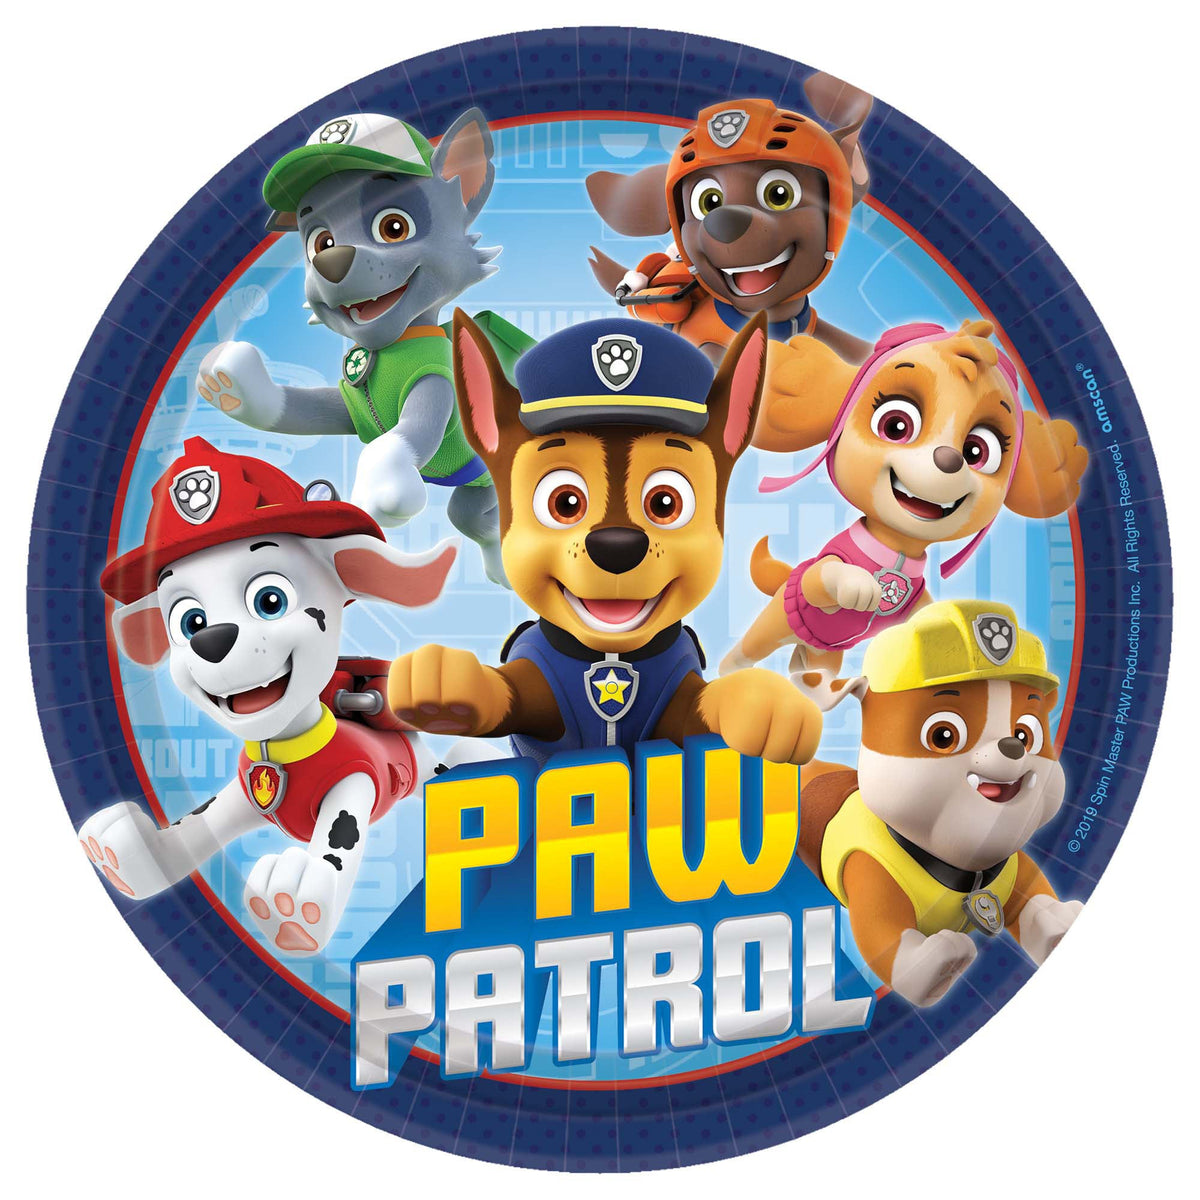 Paw Patrol™ Adventures Round 7"  Plates Package of 8